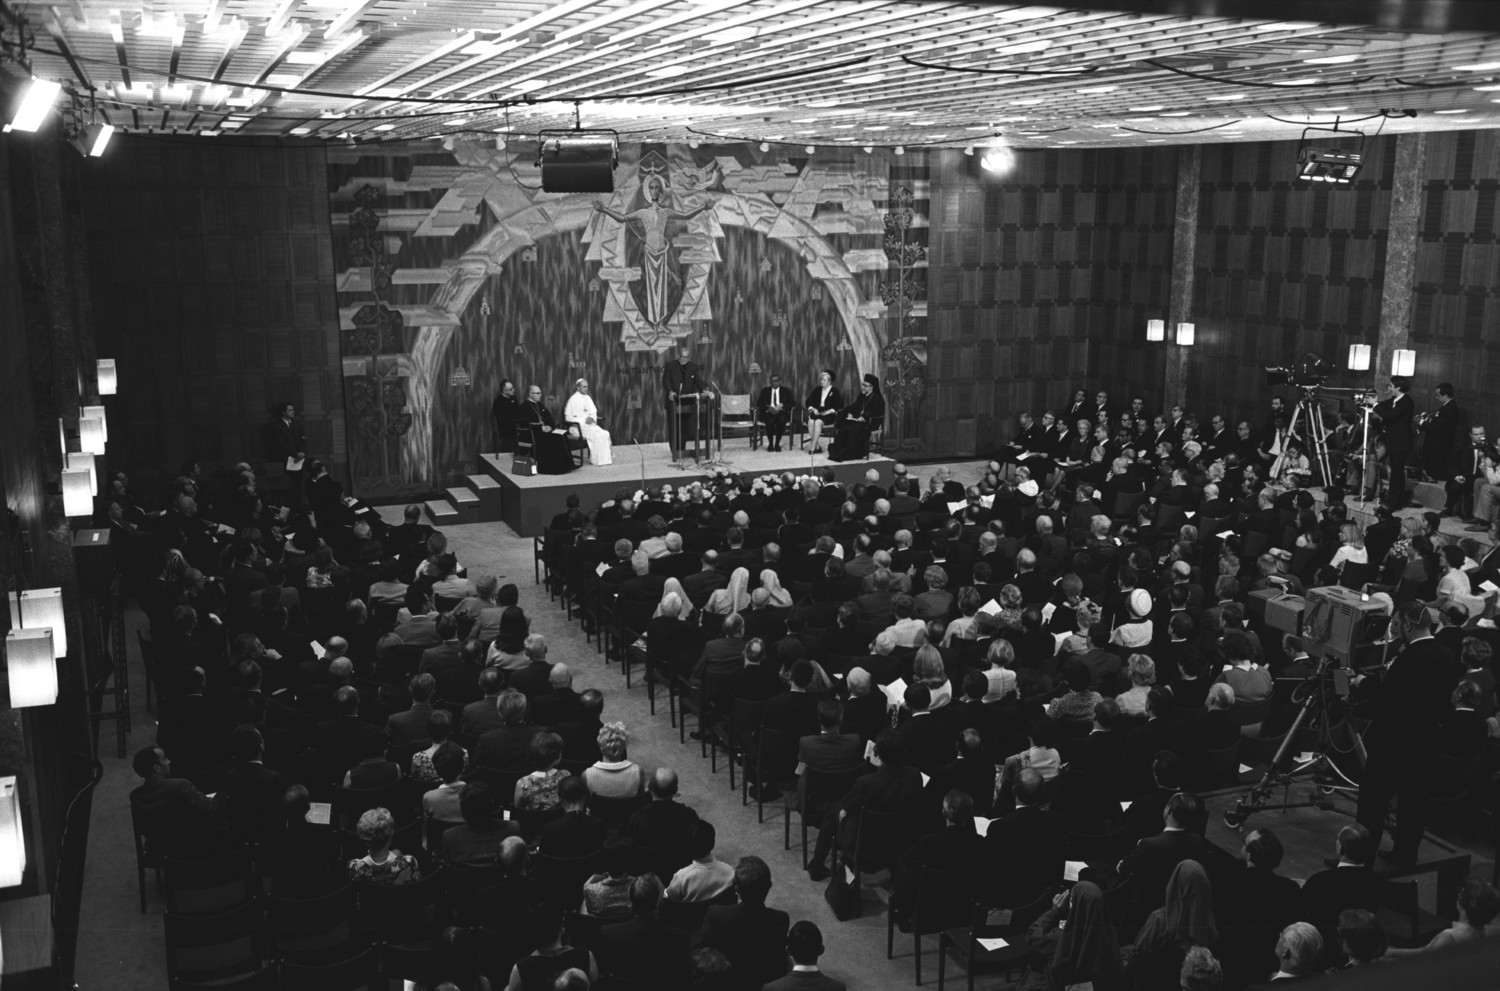 Blessed Pope Paul VI is seated as Eugene C. Blake, general secretary of the World Council of Churches, gives a speech during the Pope’s visit to the WCC in Geneva, June 10, 1969. Seated to the left on the stage are: Father Pasquale Macchi, personal secretary to the Pope, and Cardinal Johannes Willebrands, president of the Pontifical Council for Promoting Christian Unity. Pope Francis is scheduled to attend an ecumenical prayer service and meeting at the WCC during a one-day visit to Geneva June 21.